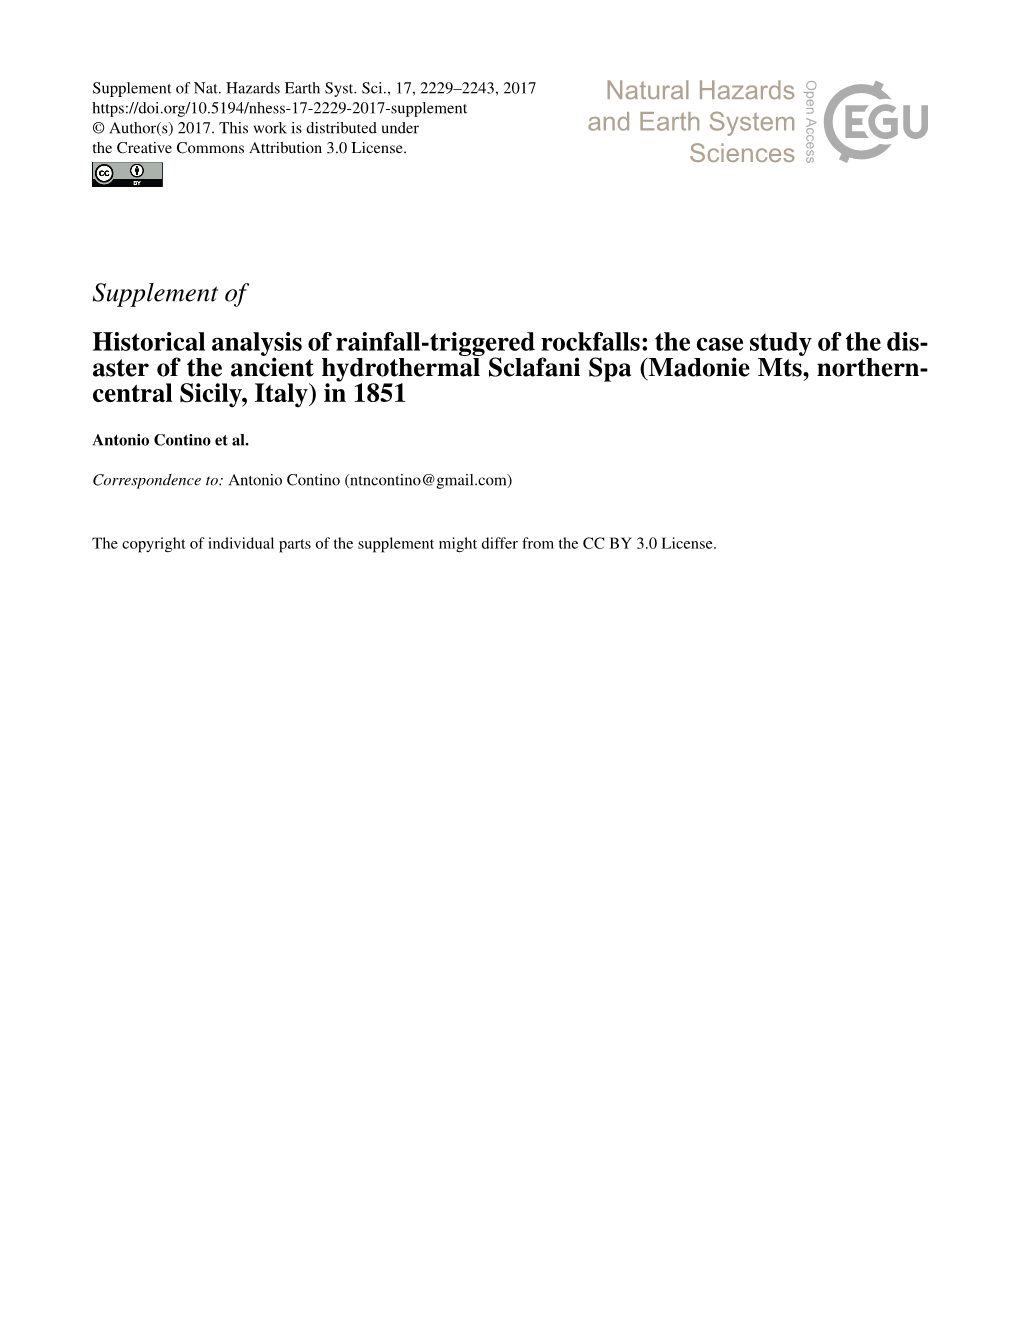 Supplement of Historical Analysis of Rainfall-Triggered Rockfalls: the Case